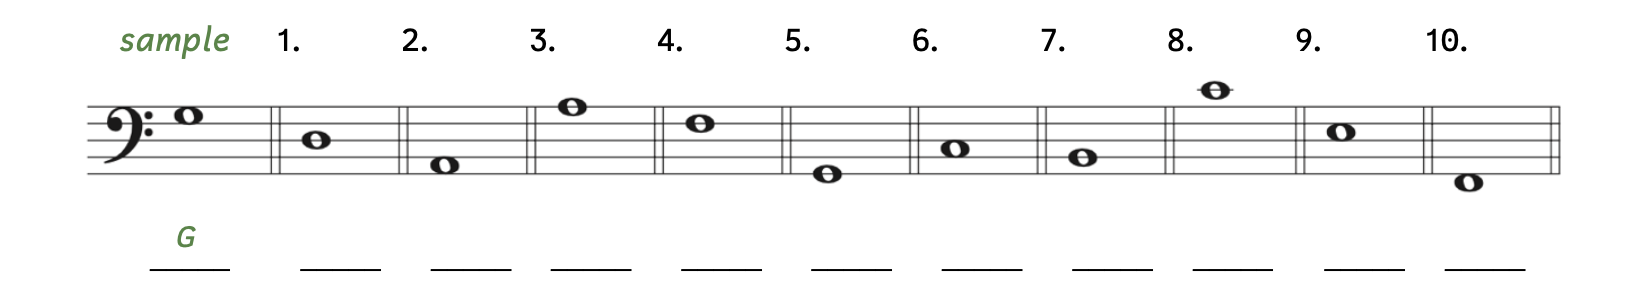 Exercise to identify pitches in the bass clef. The sample is a whole note in the fourth space. The sample's answer is G. Number 1, the note is on the third line. Number 2, the note is in the first space. Number 3, the note is on the fifth line. Number 4, the note is on the fourth line. Number 5, the note is on the first line. Number 6, the note is in the second space. Number 7, the note is on the second line. Number 8, the note is on the ledger line above the staff. Number 9, the note is in the third space. Number 10, the note is in the space below the staff.